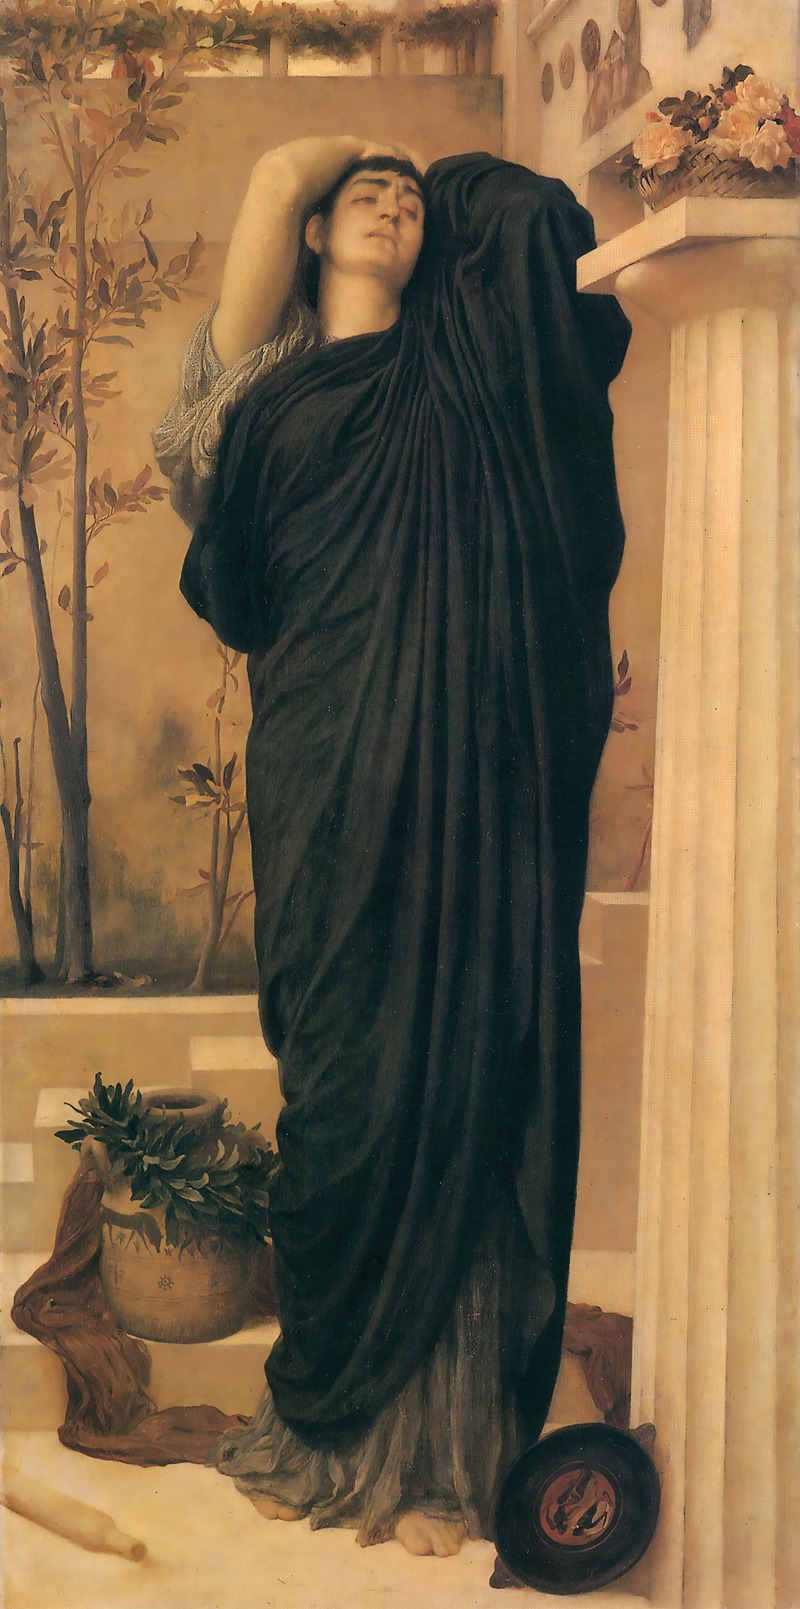 Frederic Leighton - Electra At The Tomb Of Agamemnon